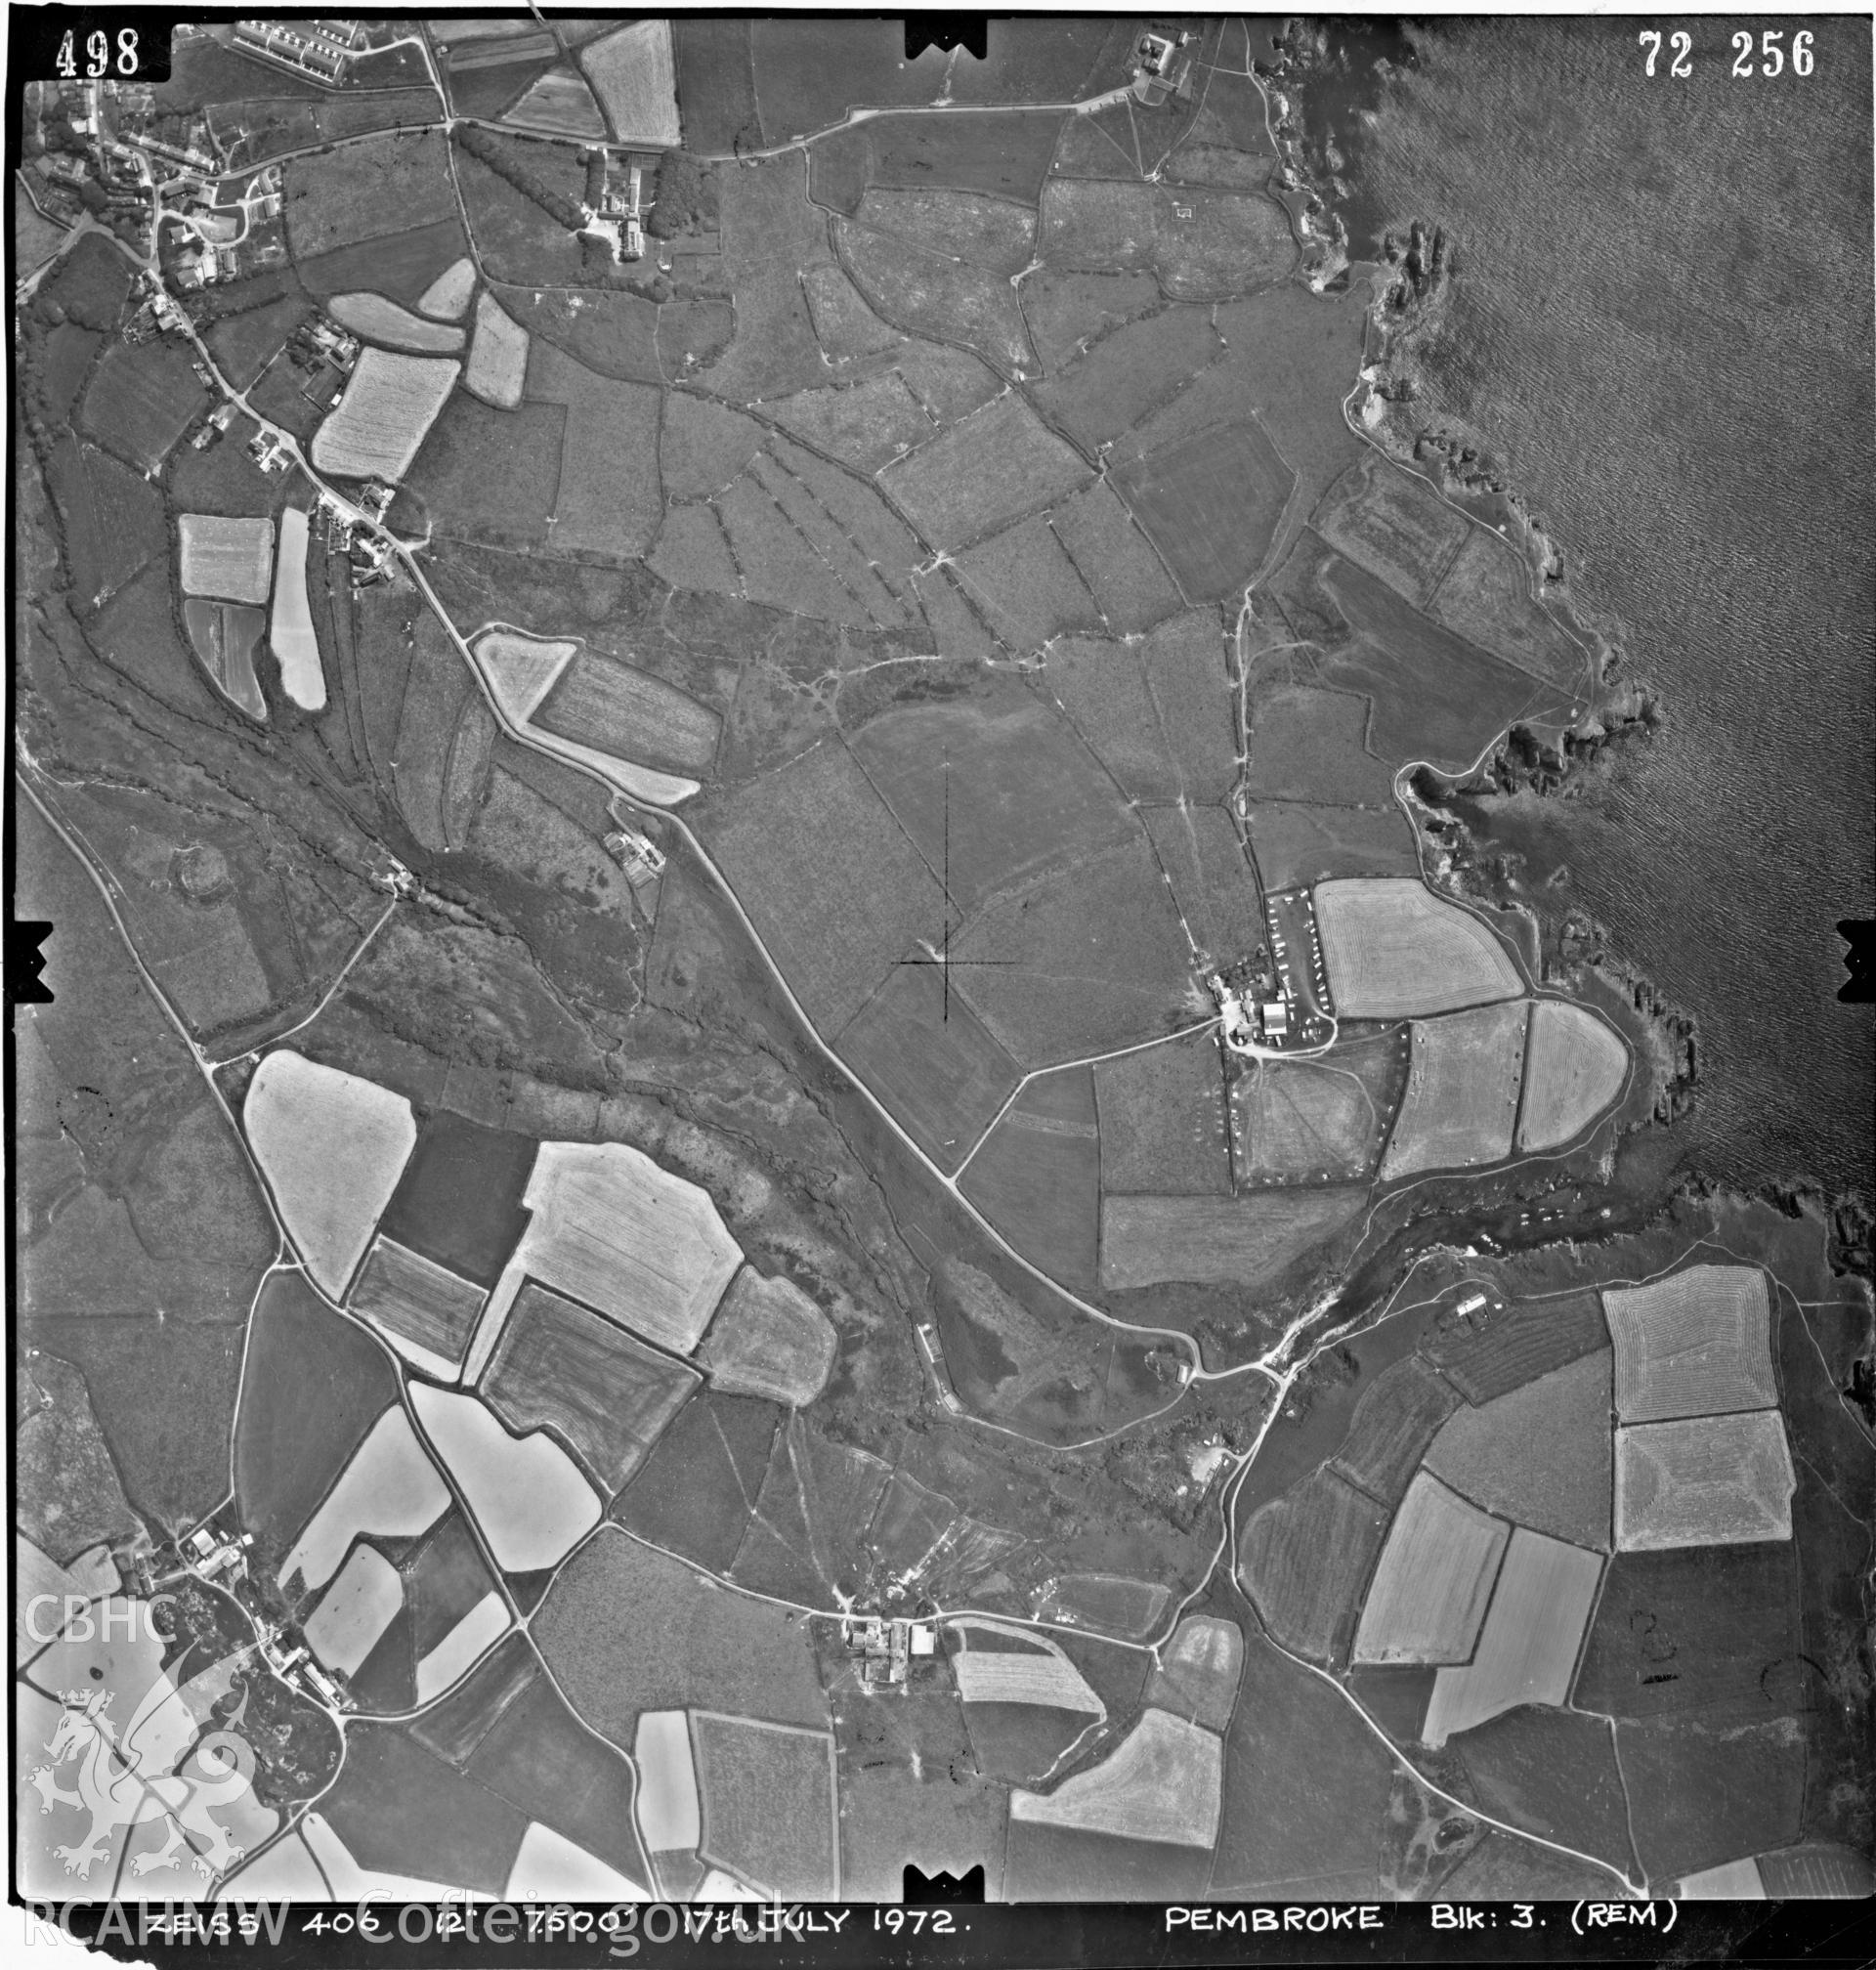 Digitized copy of an aerial photograph showing Porthglais area, taken by Ordnance Survey, 1972.